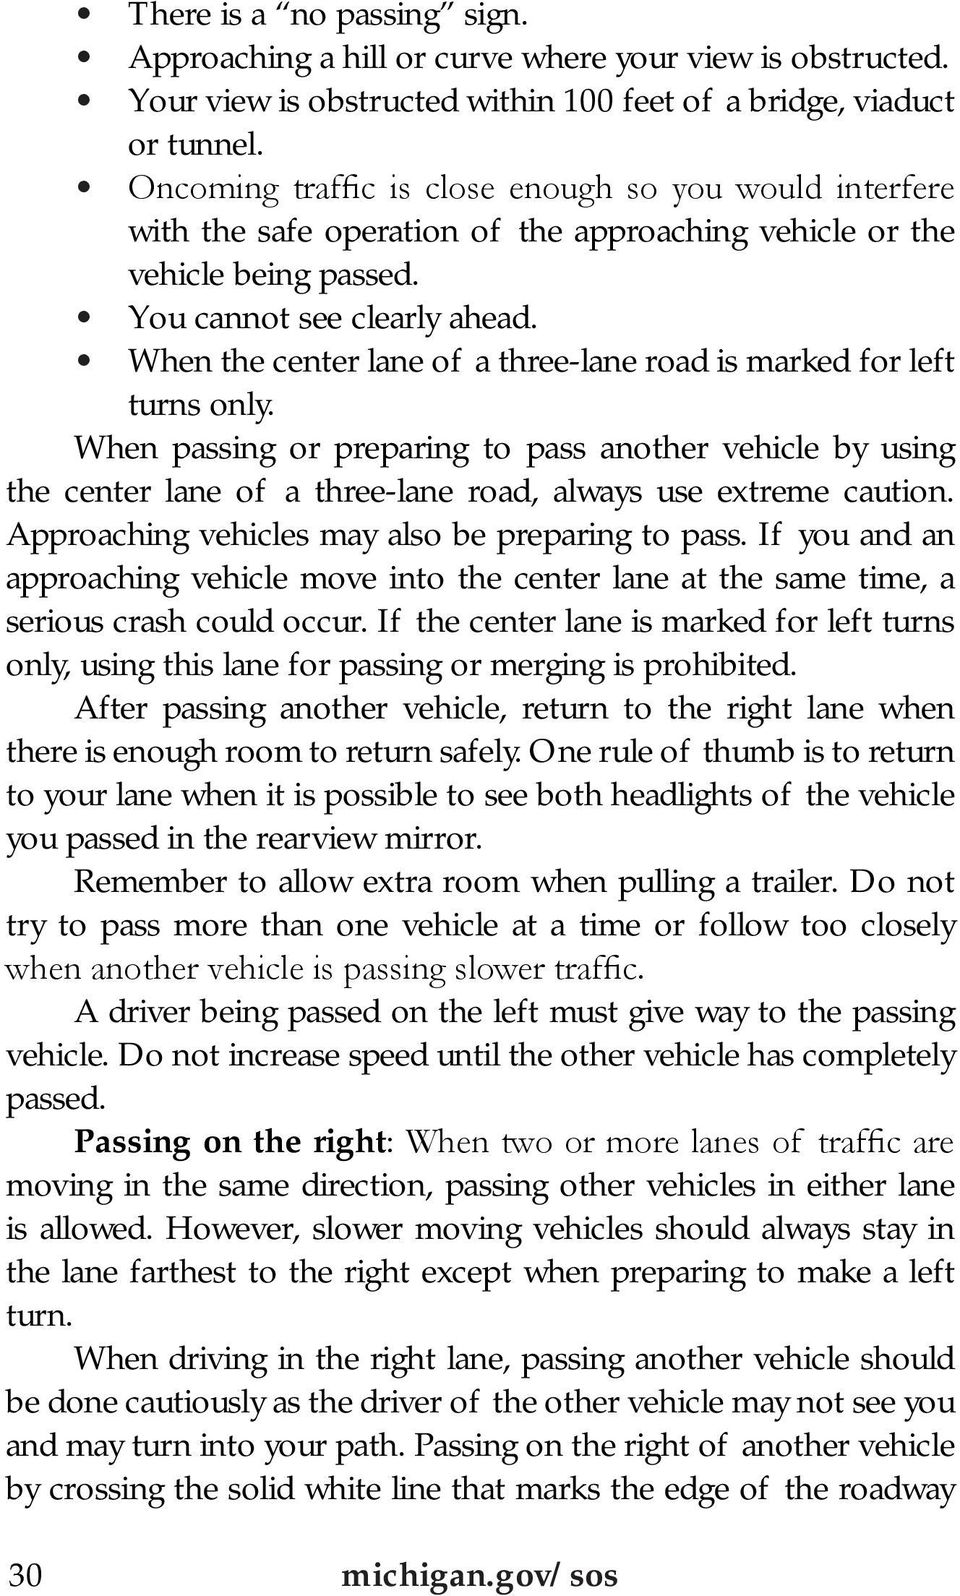 When the center lane of a three-lane road is marked for left turns only. When passing or preparing to pass another vehicle by using the center lane of a three-lane road, always use extreme caution.